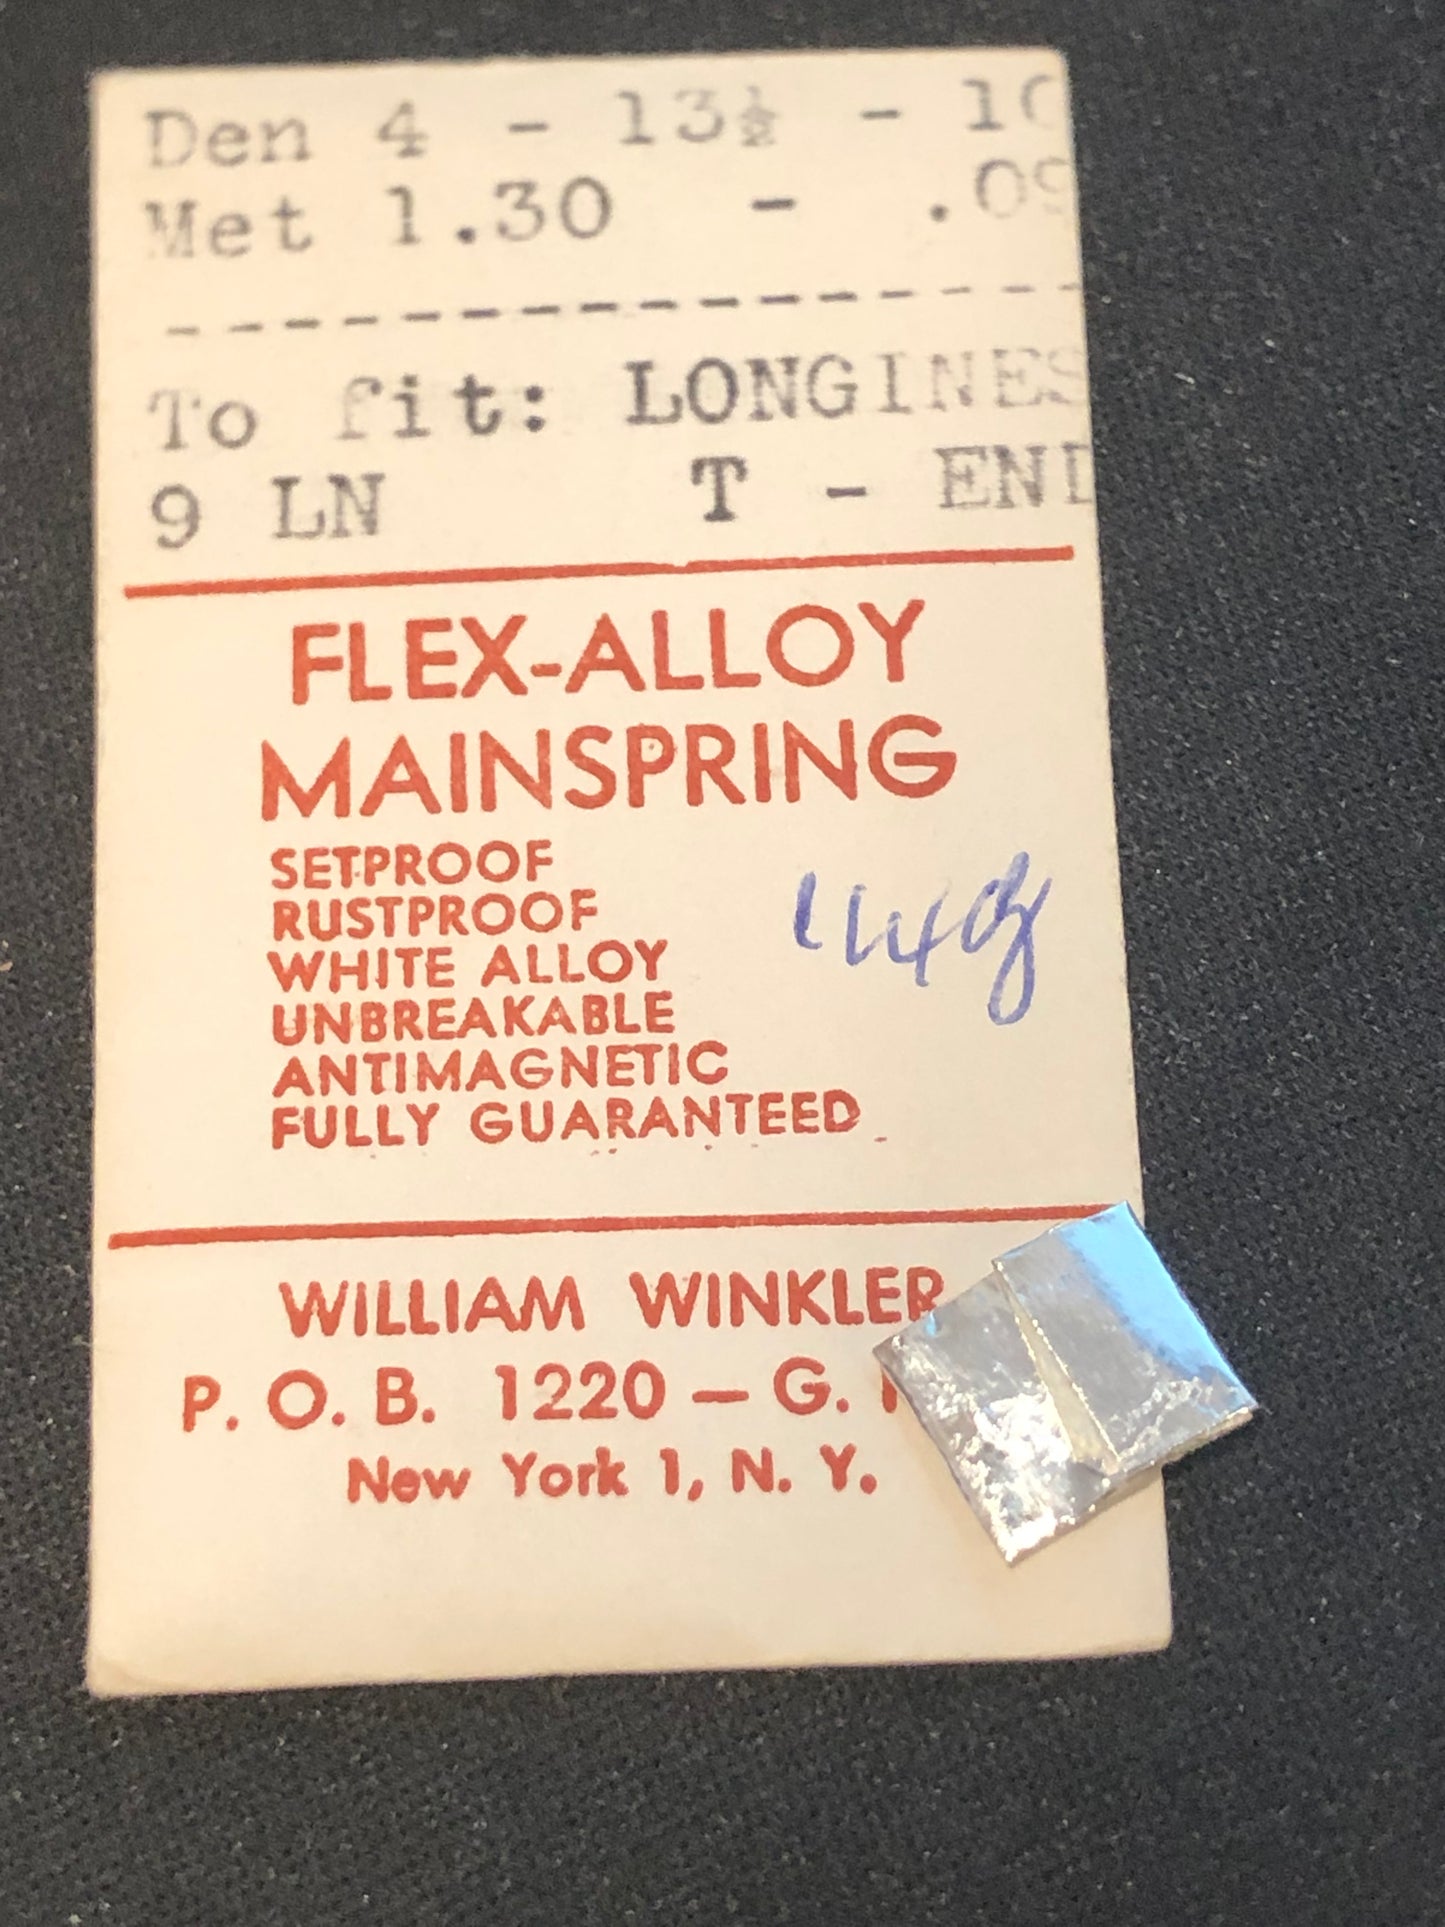 Flex-Alloy Mainspring for Longines 9 LN - Alloy